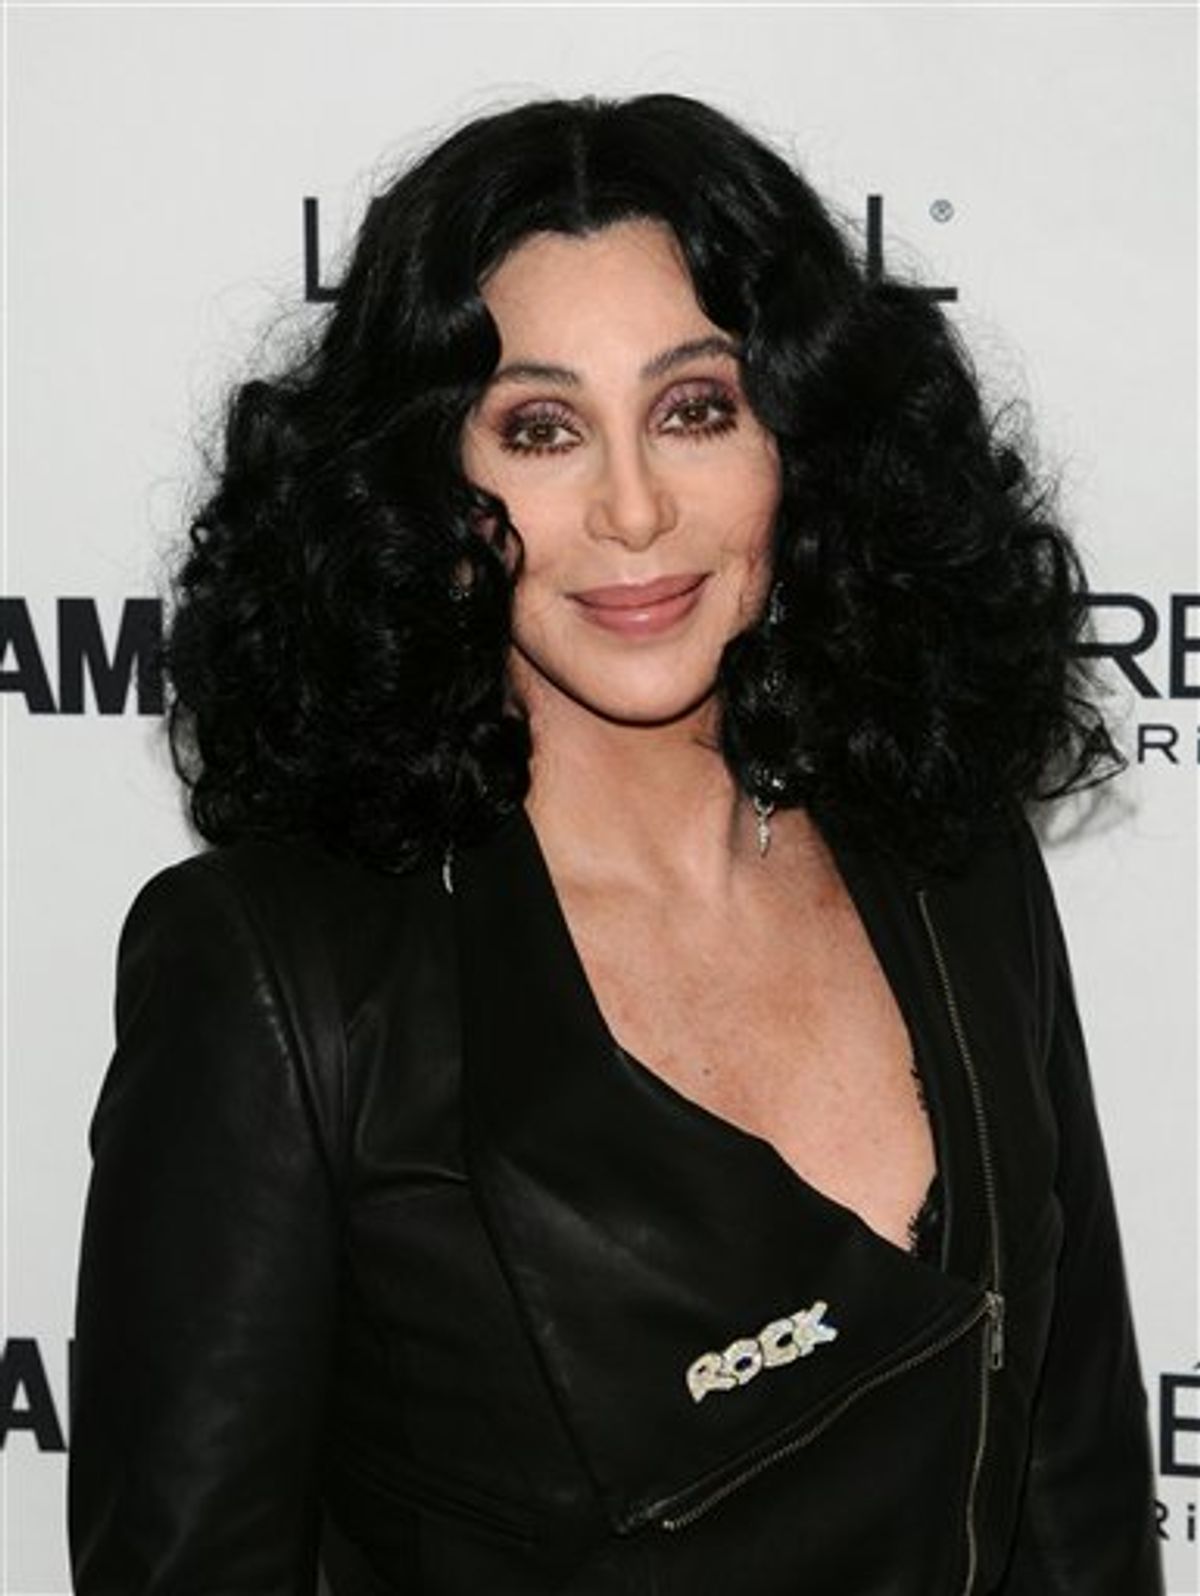 Singer Cher attends the 20th annual Glamour Women of the Year Awards at Carnegie Hall in New York, on Monday, Nov. 8, 2010. (AP Photo/Peter Kramer) (AP)